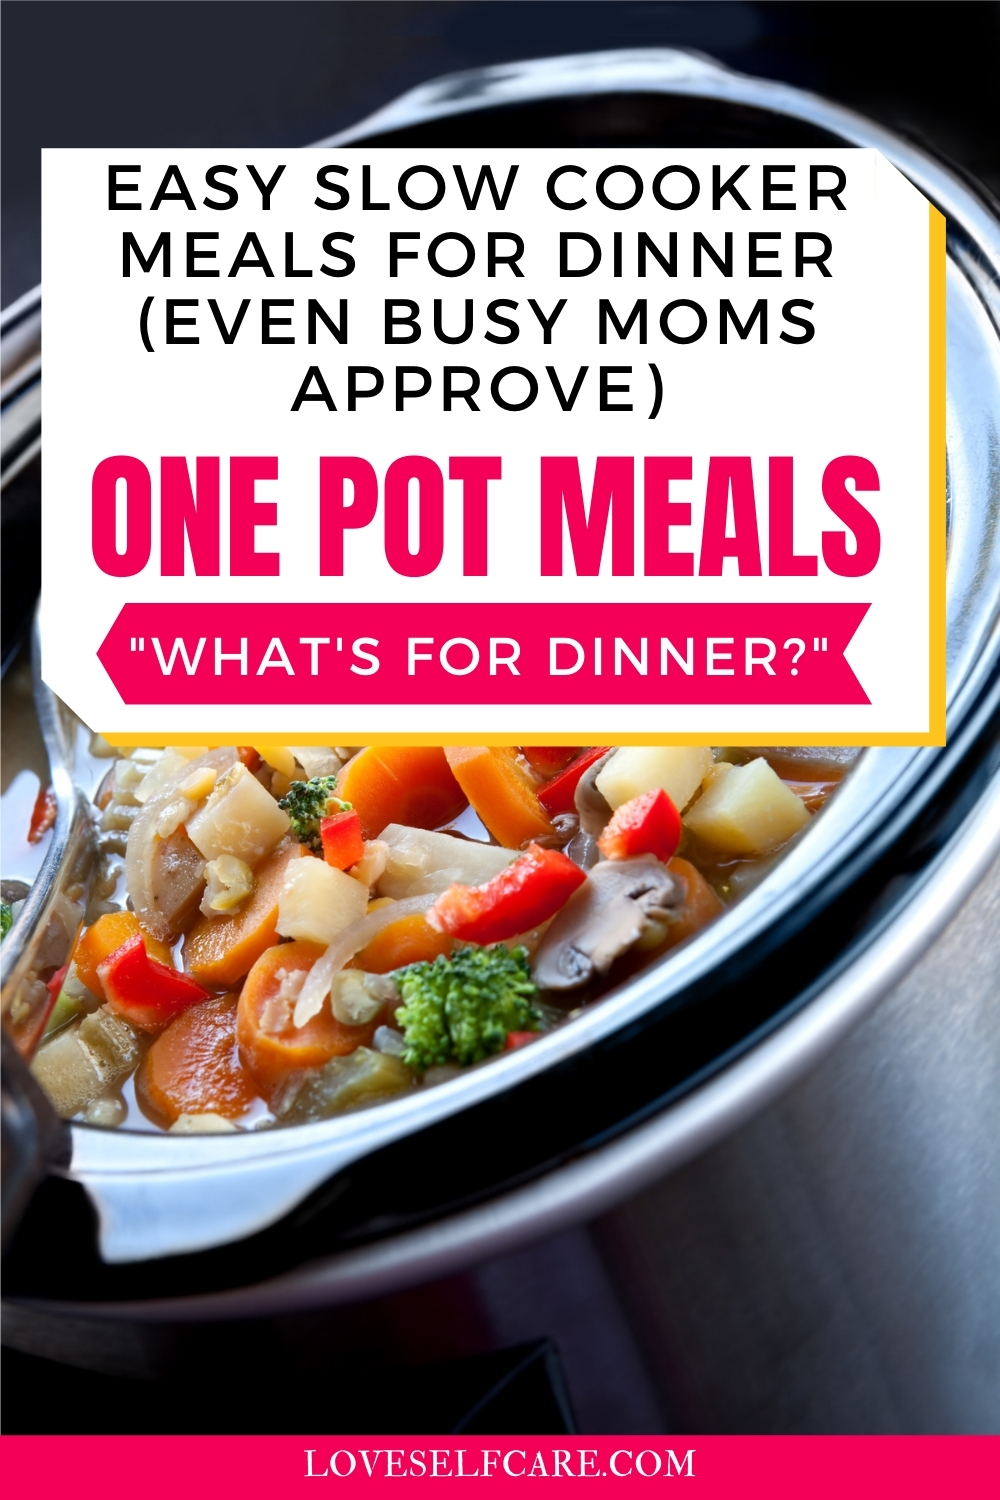 How to Use a Slow Cooker to Make Meal Time Trouble-Free - Loveselfcare